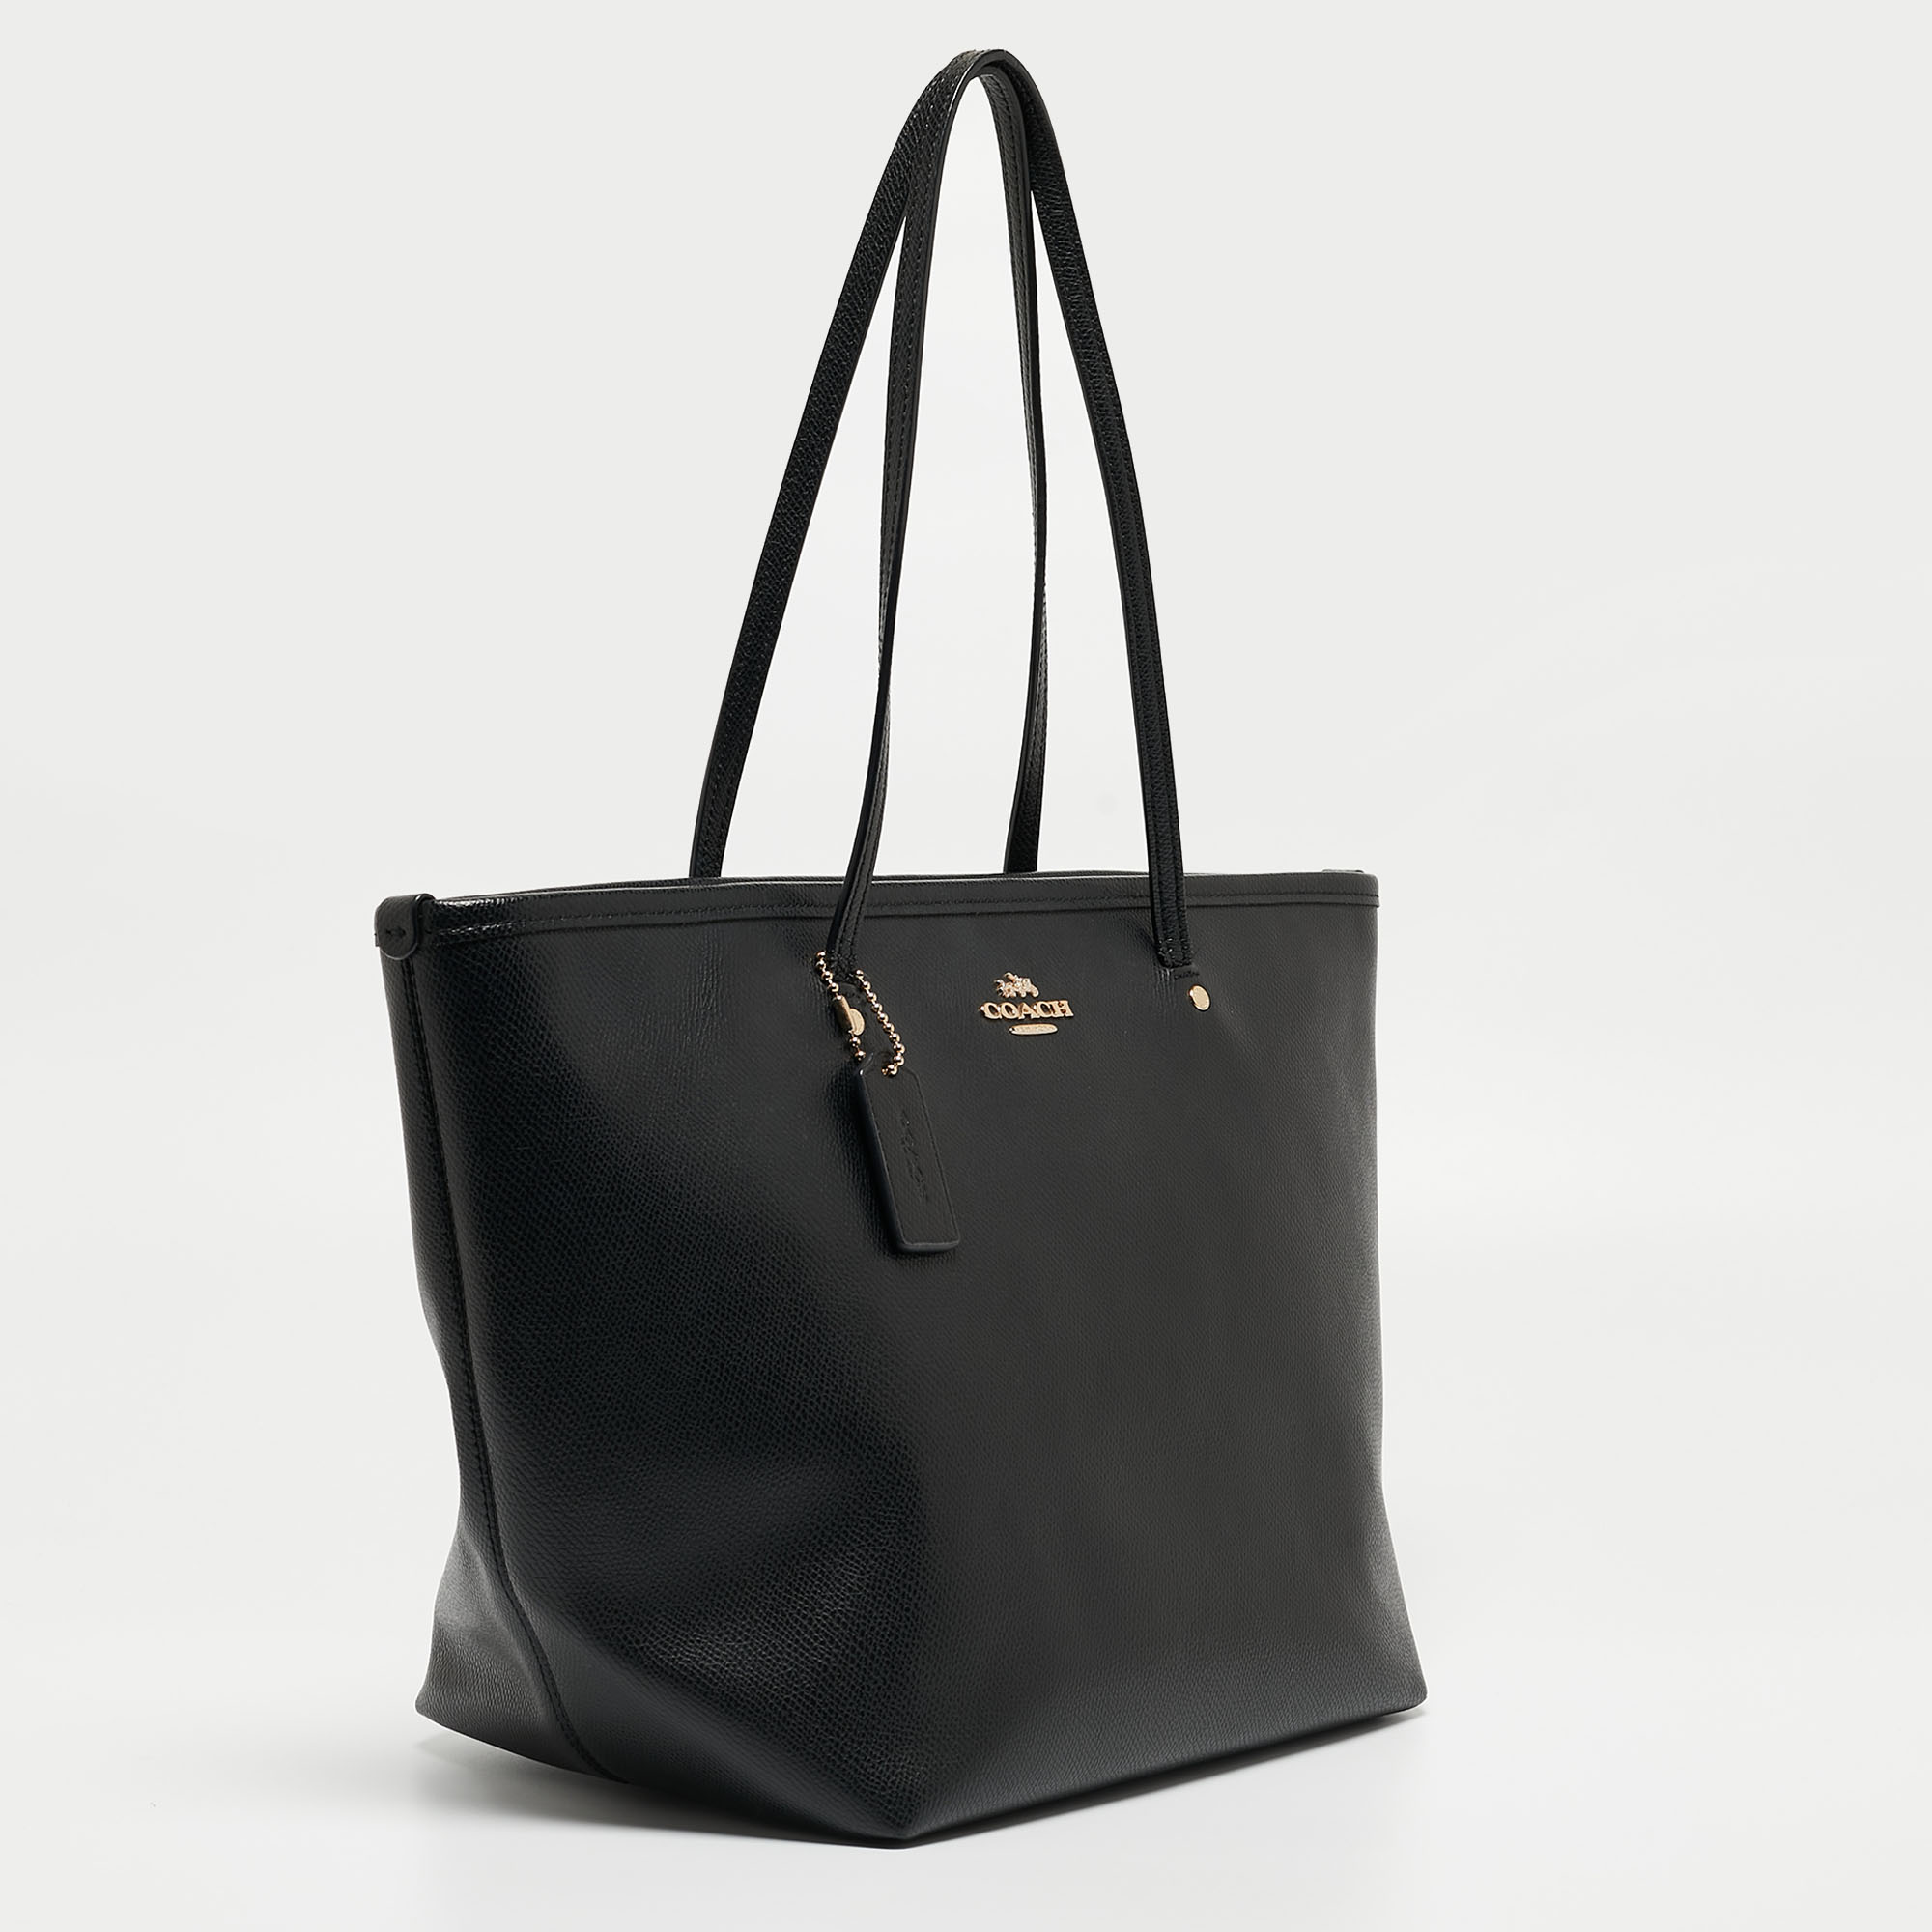 Coach Black Leather City Top Zip Tote